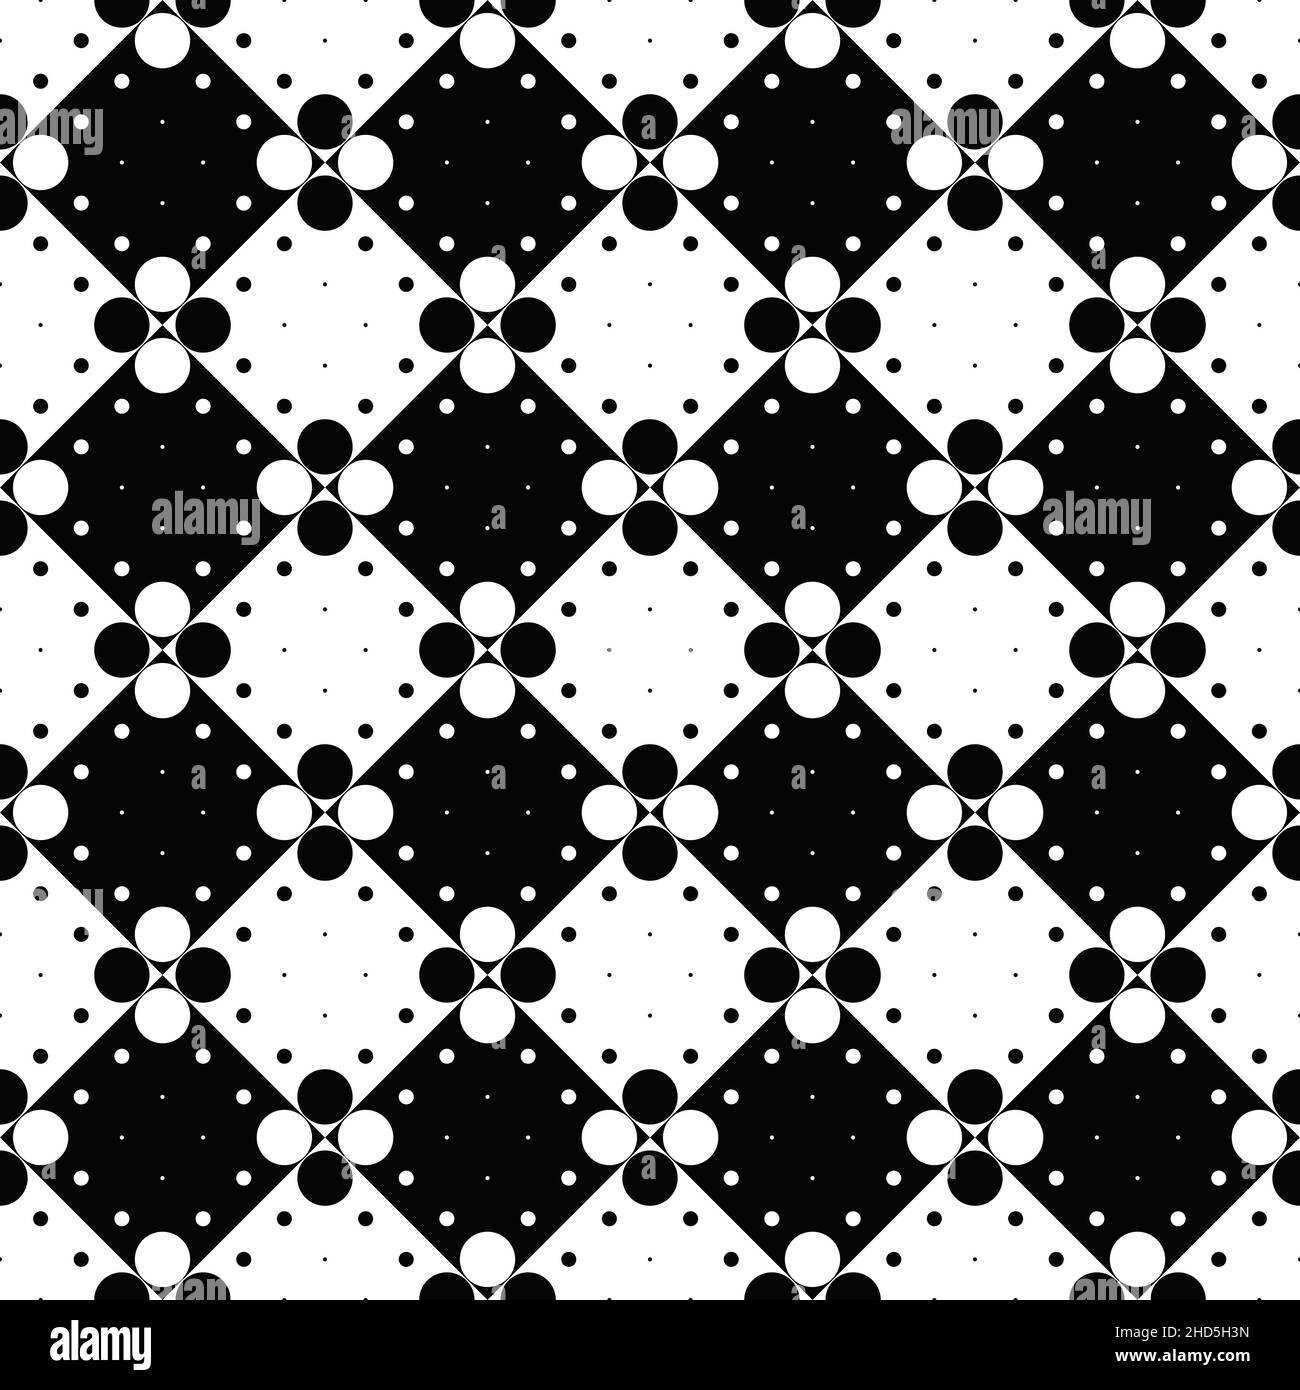 Black and white abstract geometrical dot pattern background Stock Vector